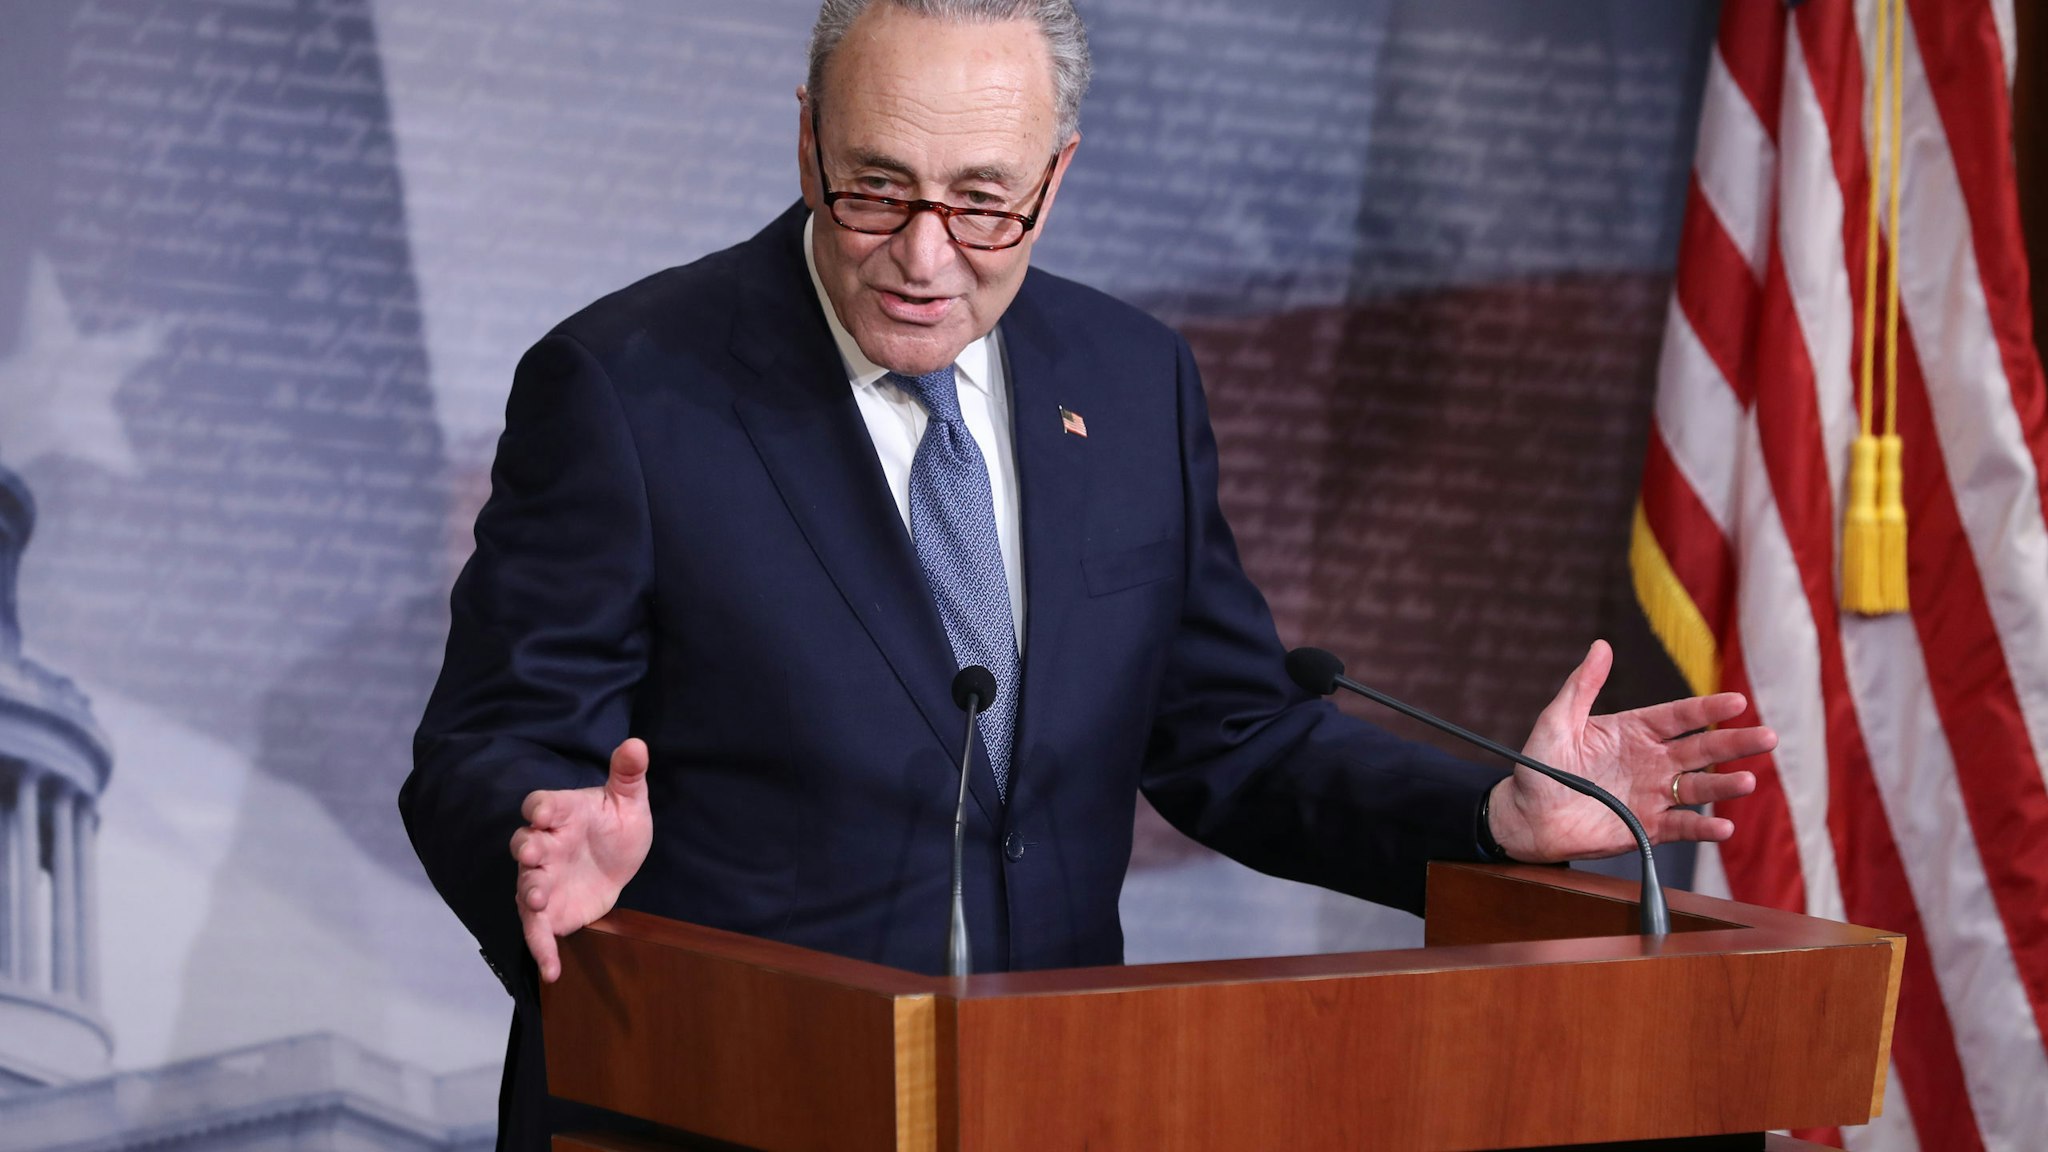 WASHINGTON, DC - APRIL 21: Minority Leader Charles Schumer (D-NY) talks to reporters U.S. Capitol April 21, 2020 in Washington, DC. Schumer, House Speaker Nancy Pelosi (D-CA) and Senate Majority Leader Mitch McConnell (R-KY) agreed on new $500 billion bipartisan deal to deliver more coronavirus relief to small businesses and hospitals. (Photo by Chip Somodevilla/Getty Images)